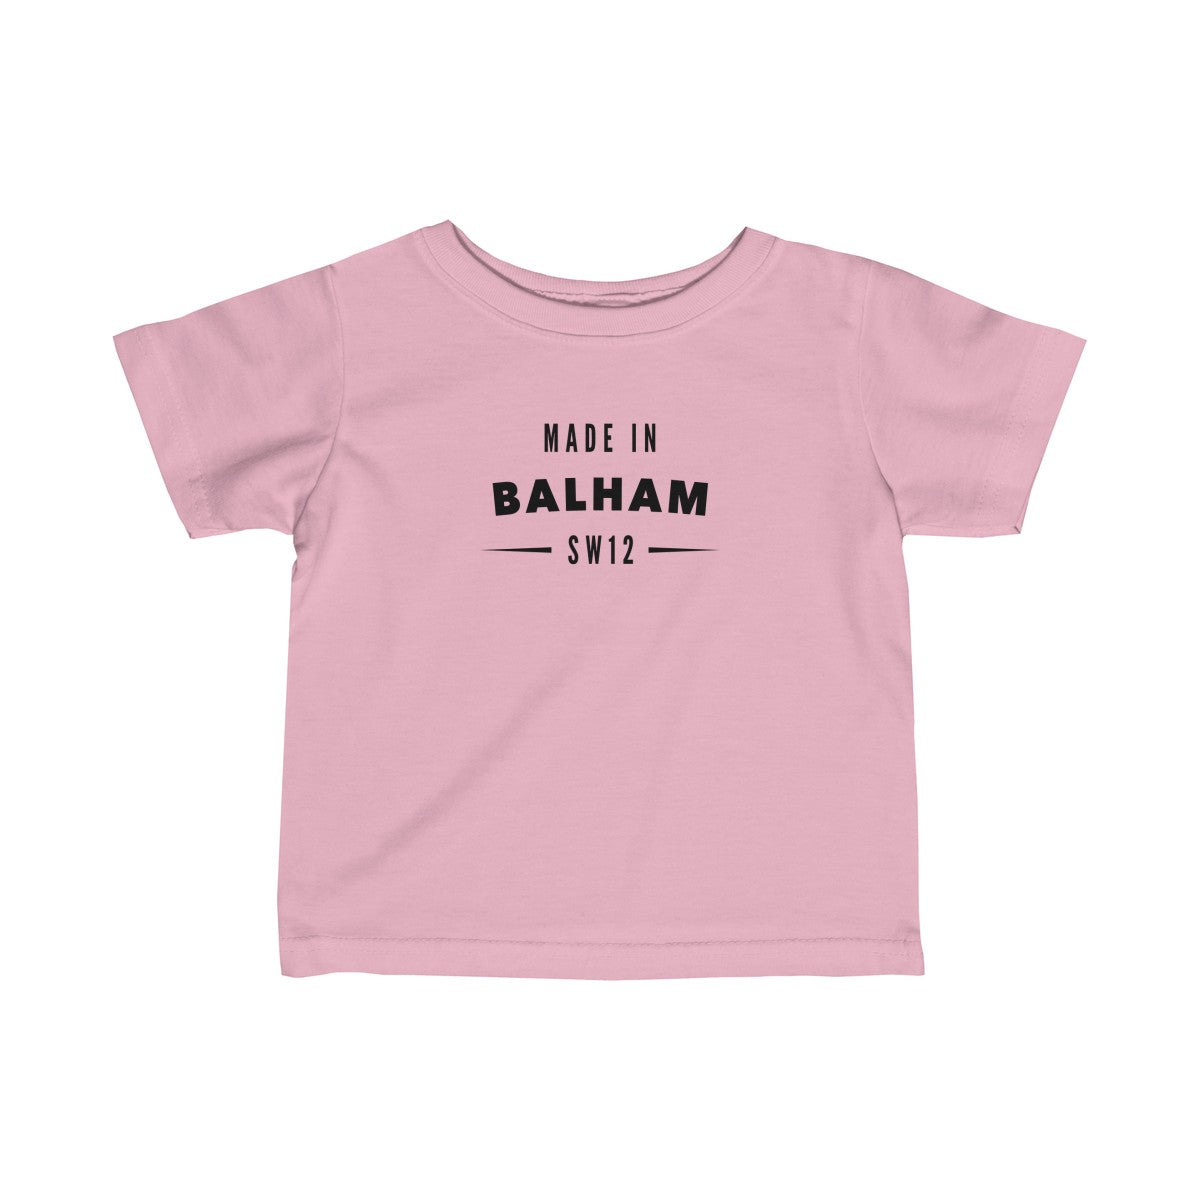 Made In Balham Infant T-Shirt